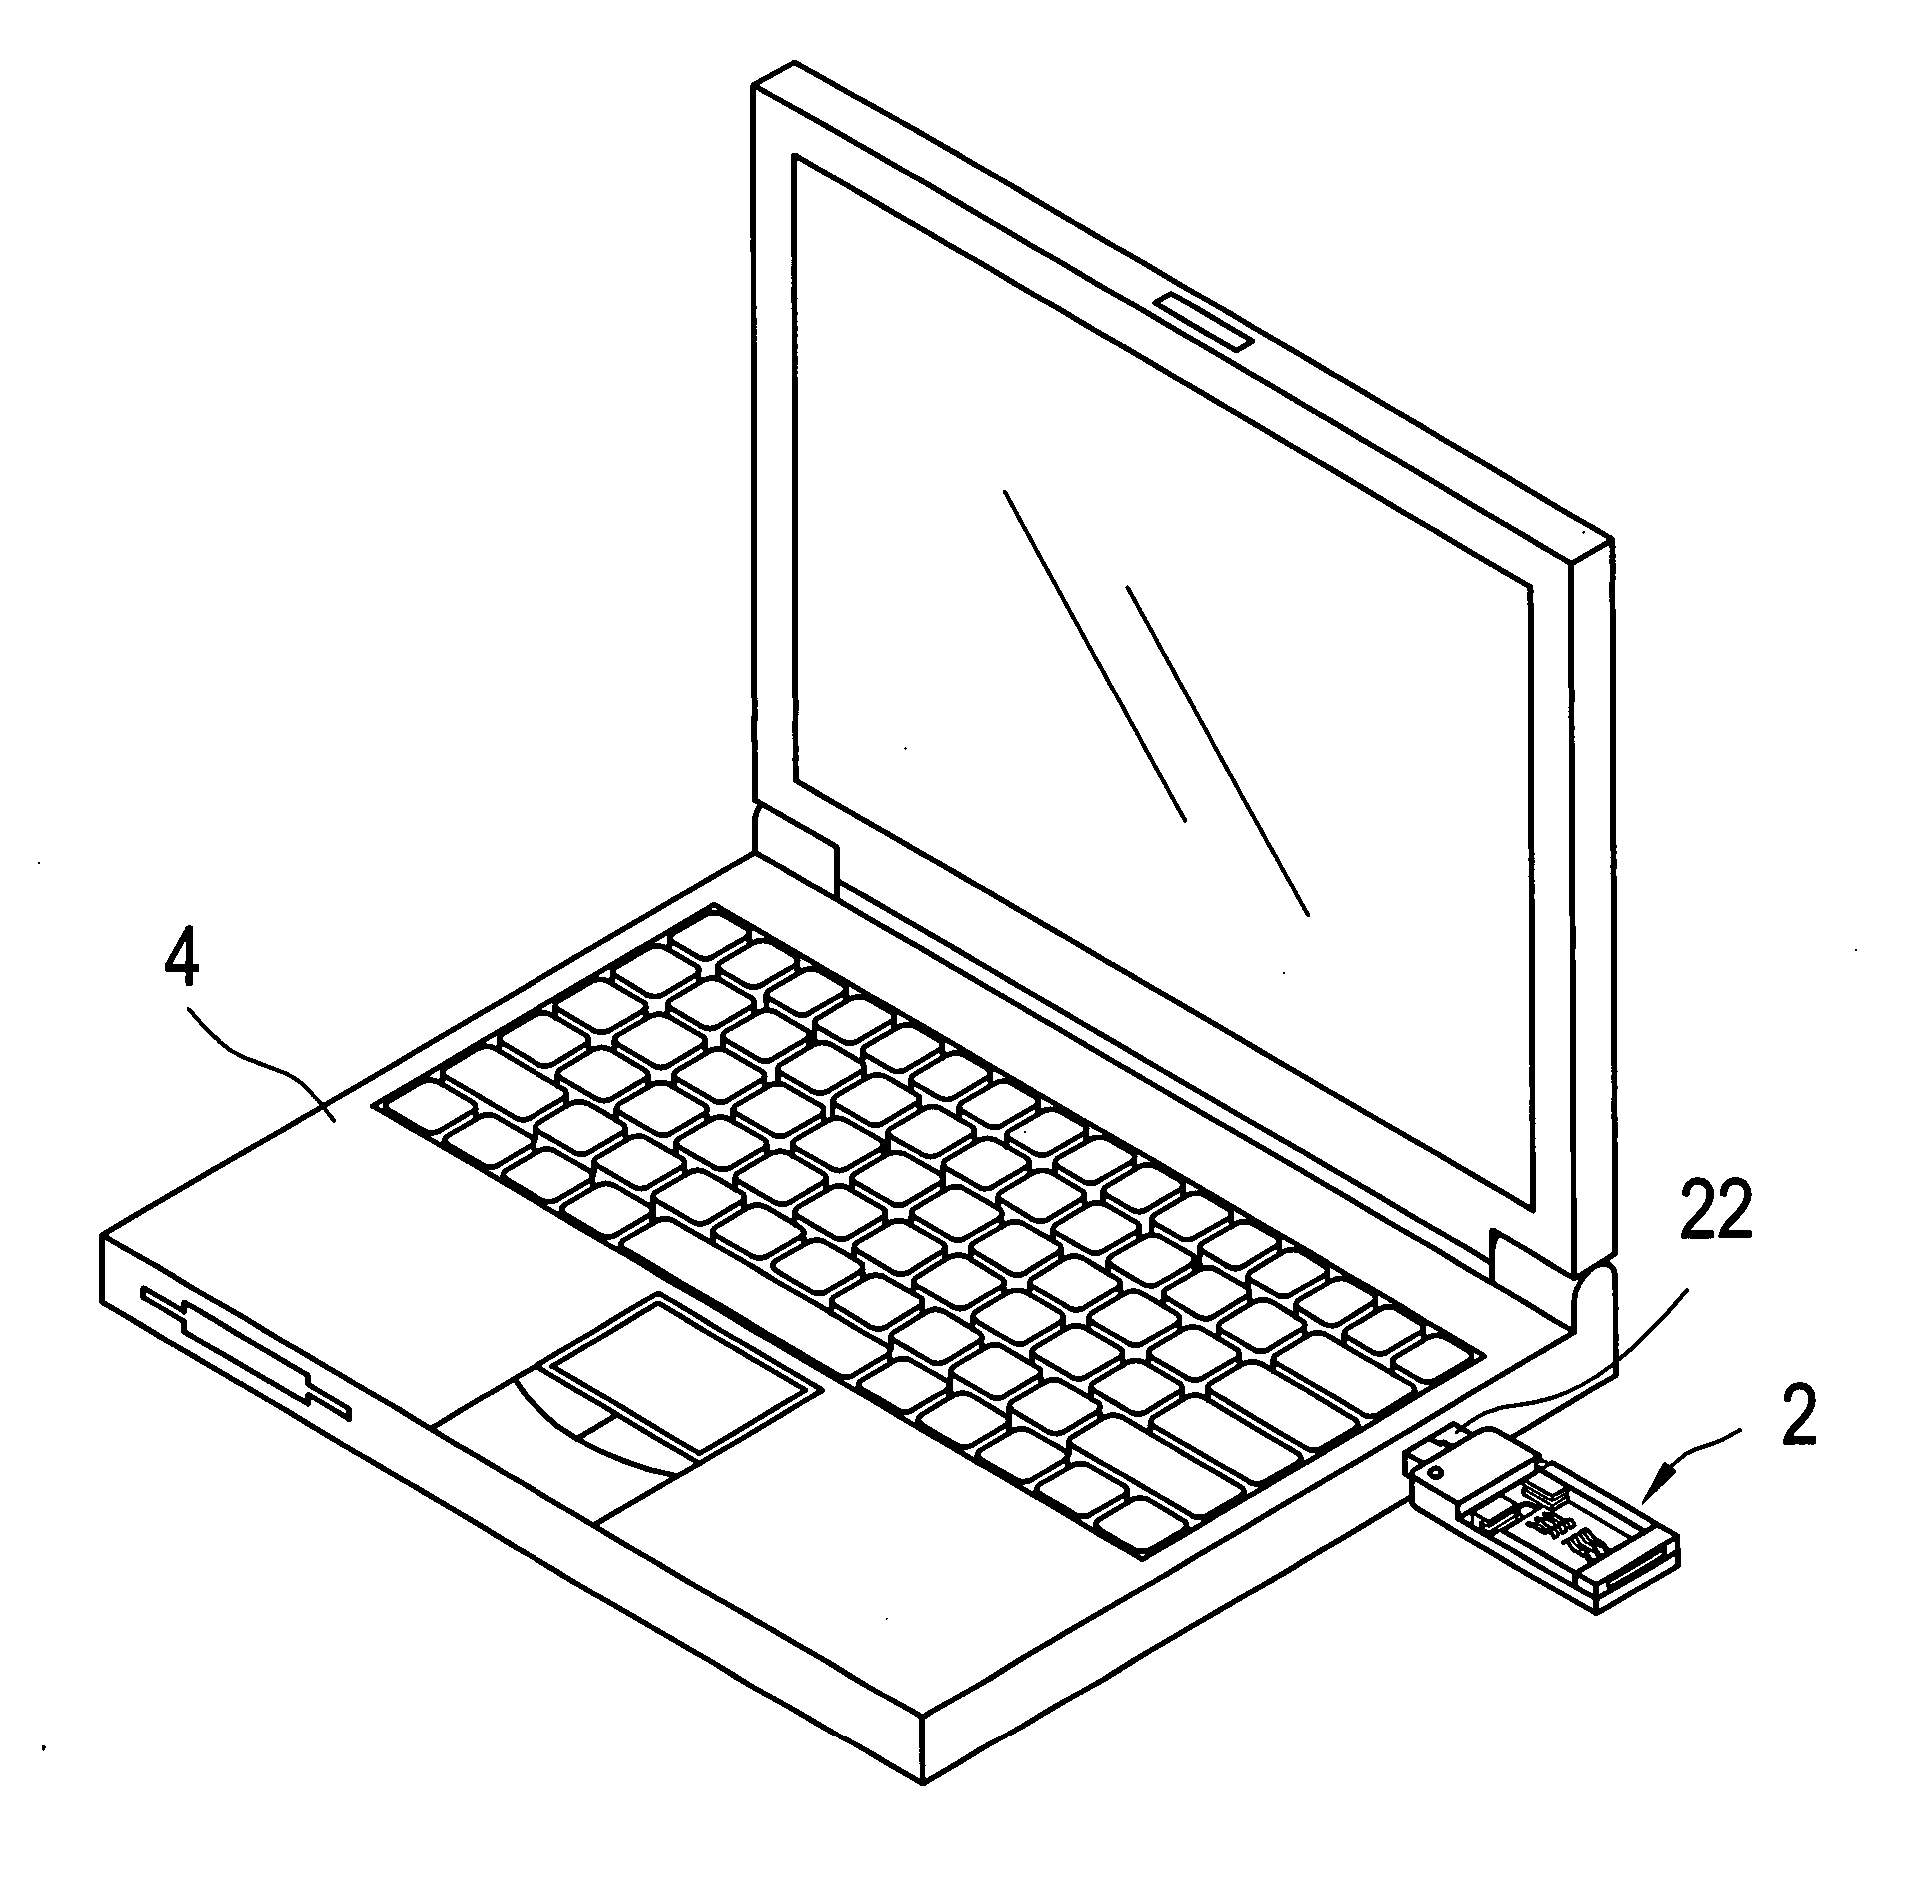 USB device having IC card reader/writer and flash memory disk functions